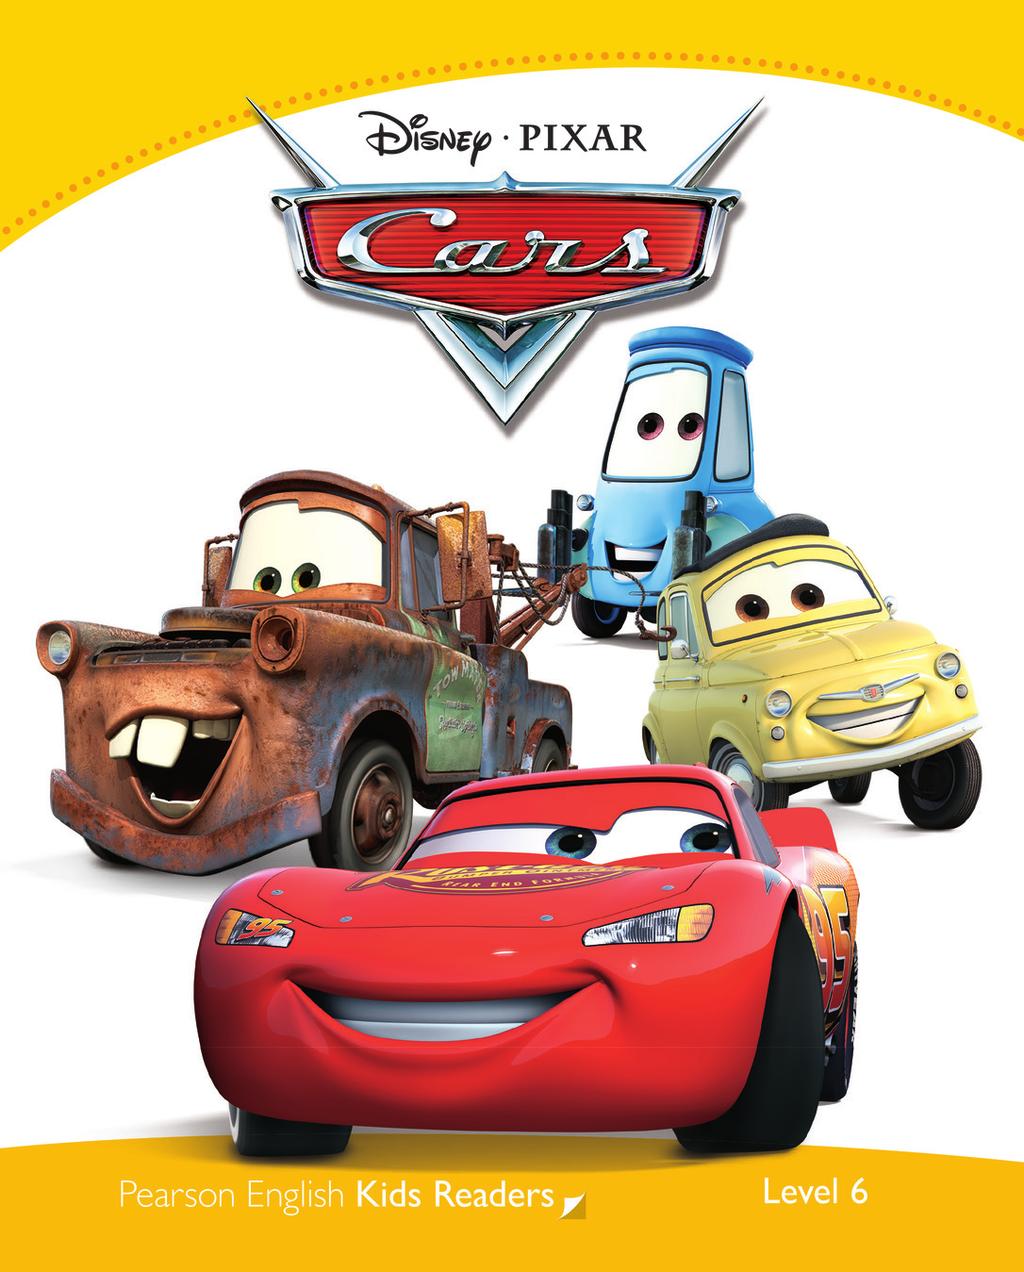 Pearson English Kids Readers Level 6 Summary of the story Lightning McQueen is a young race car trying to win the famous Piston Cup prize for the first time.